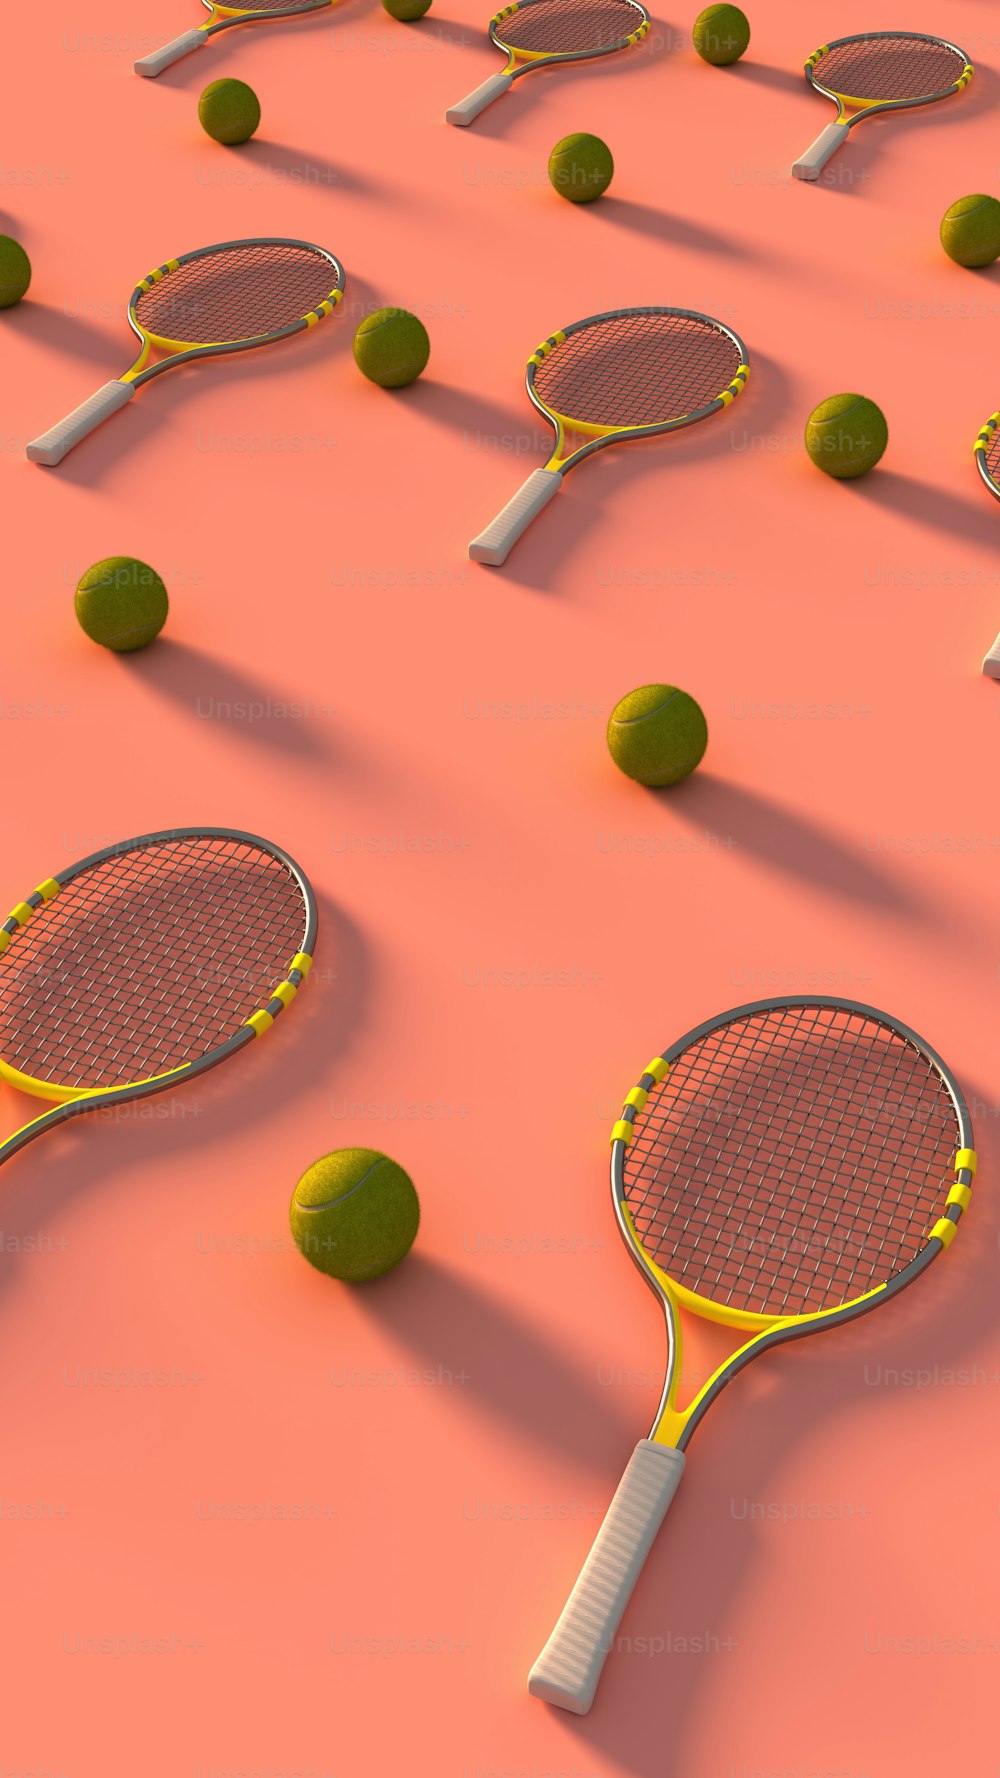 a group of tennis rackets and balls on a pink surface